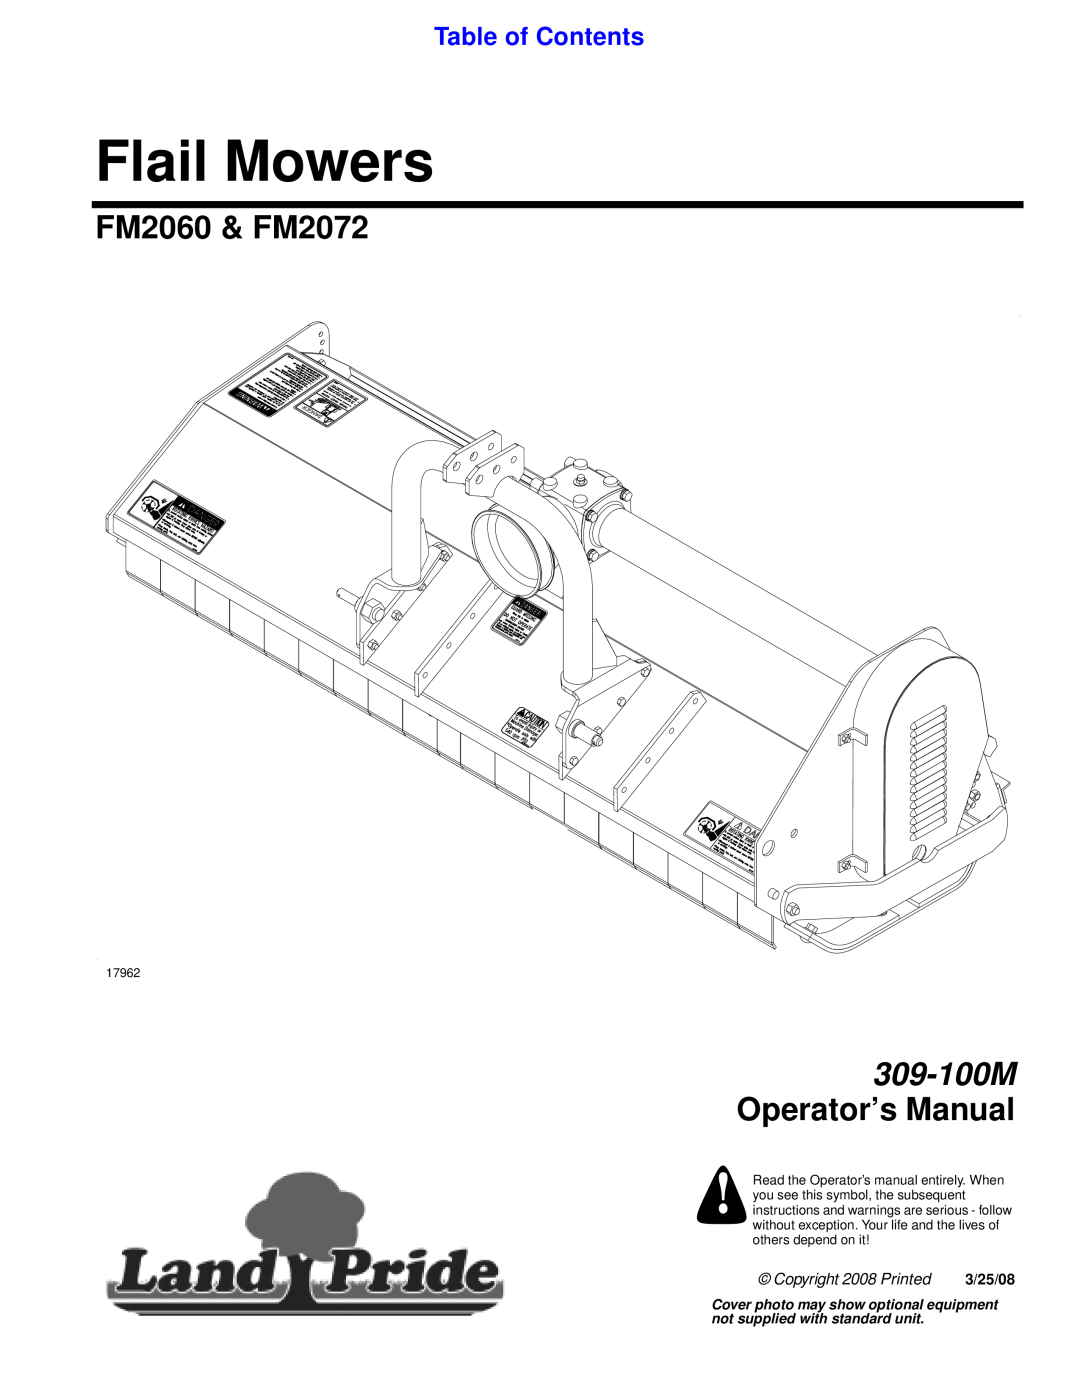 Land Pride manual FM2060 & FM2072, Table of Contents, Flail Mowers, 309-100M Operator’s Manual, Copyright 2008 Pr inted 